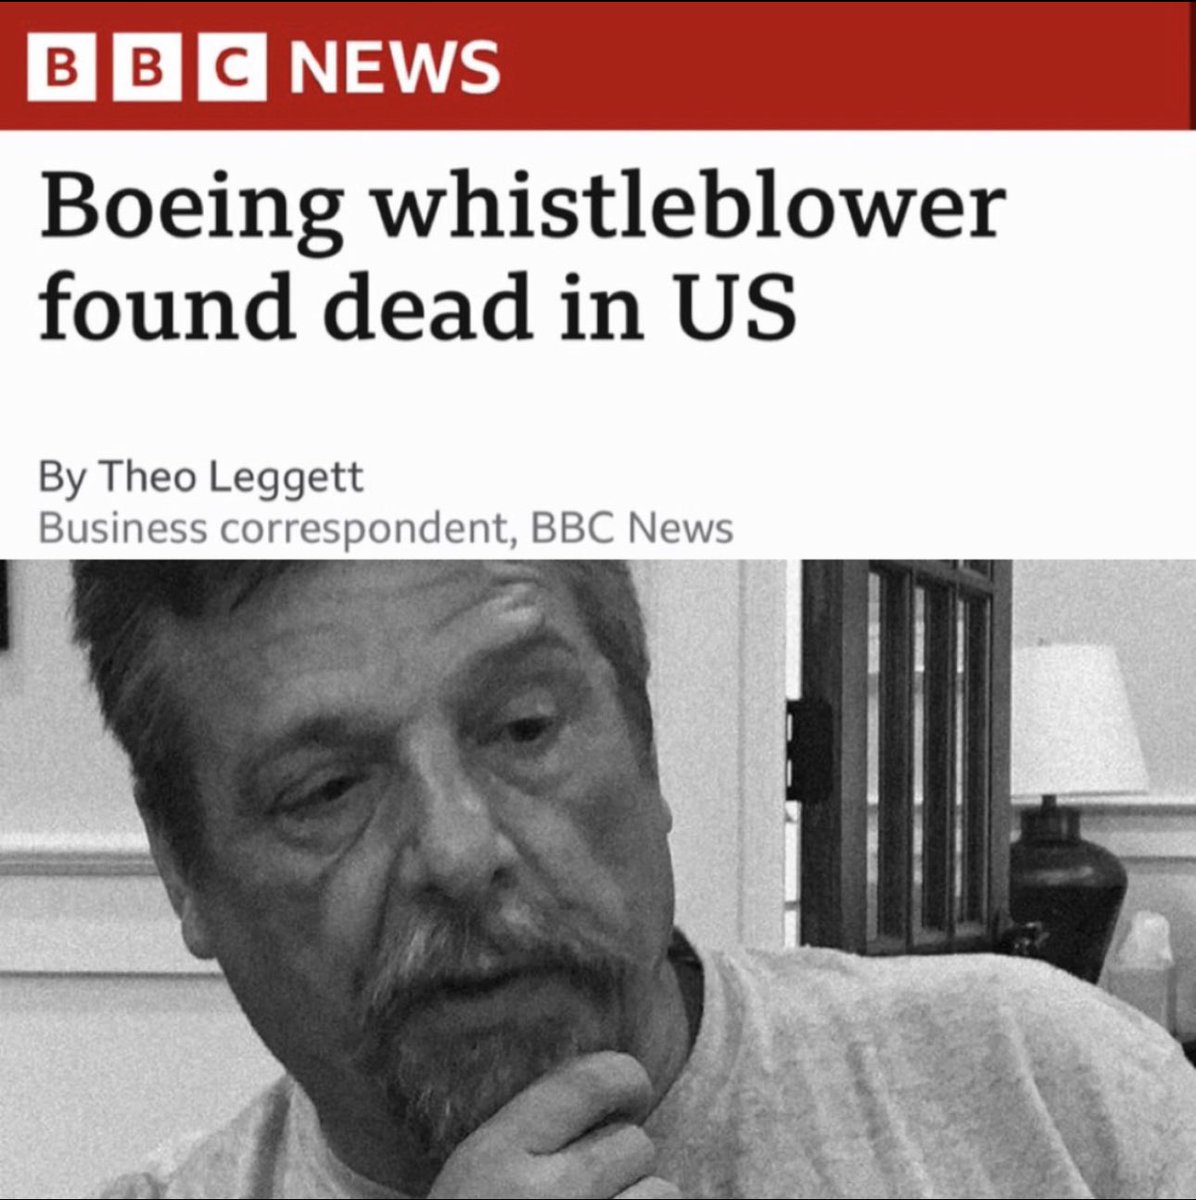 🚨🇺🇸#BREAKING: Boeing Whistleblower Found Dead Via 'Self-Inflicted' Gunshot Wound

John Barnett, 62, had worked for the aircraft company for 32 years.

John had been giving key information in a whistleblower lawsuit against the company in which he raised concerns about the firm's